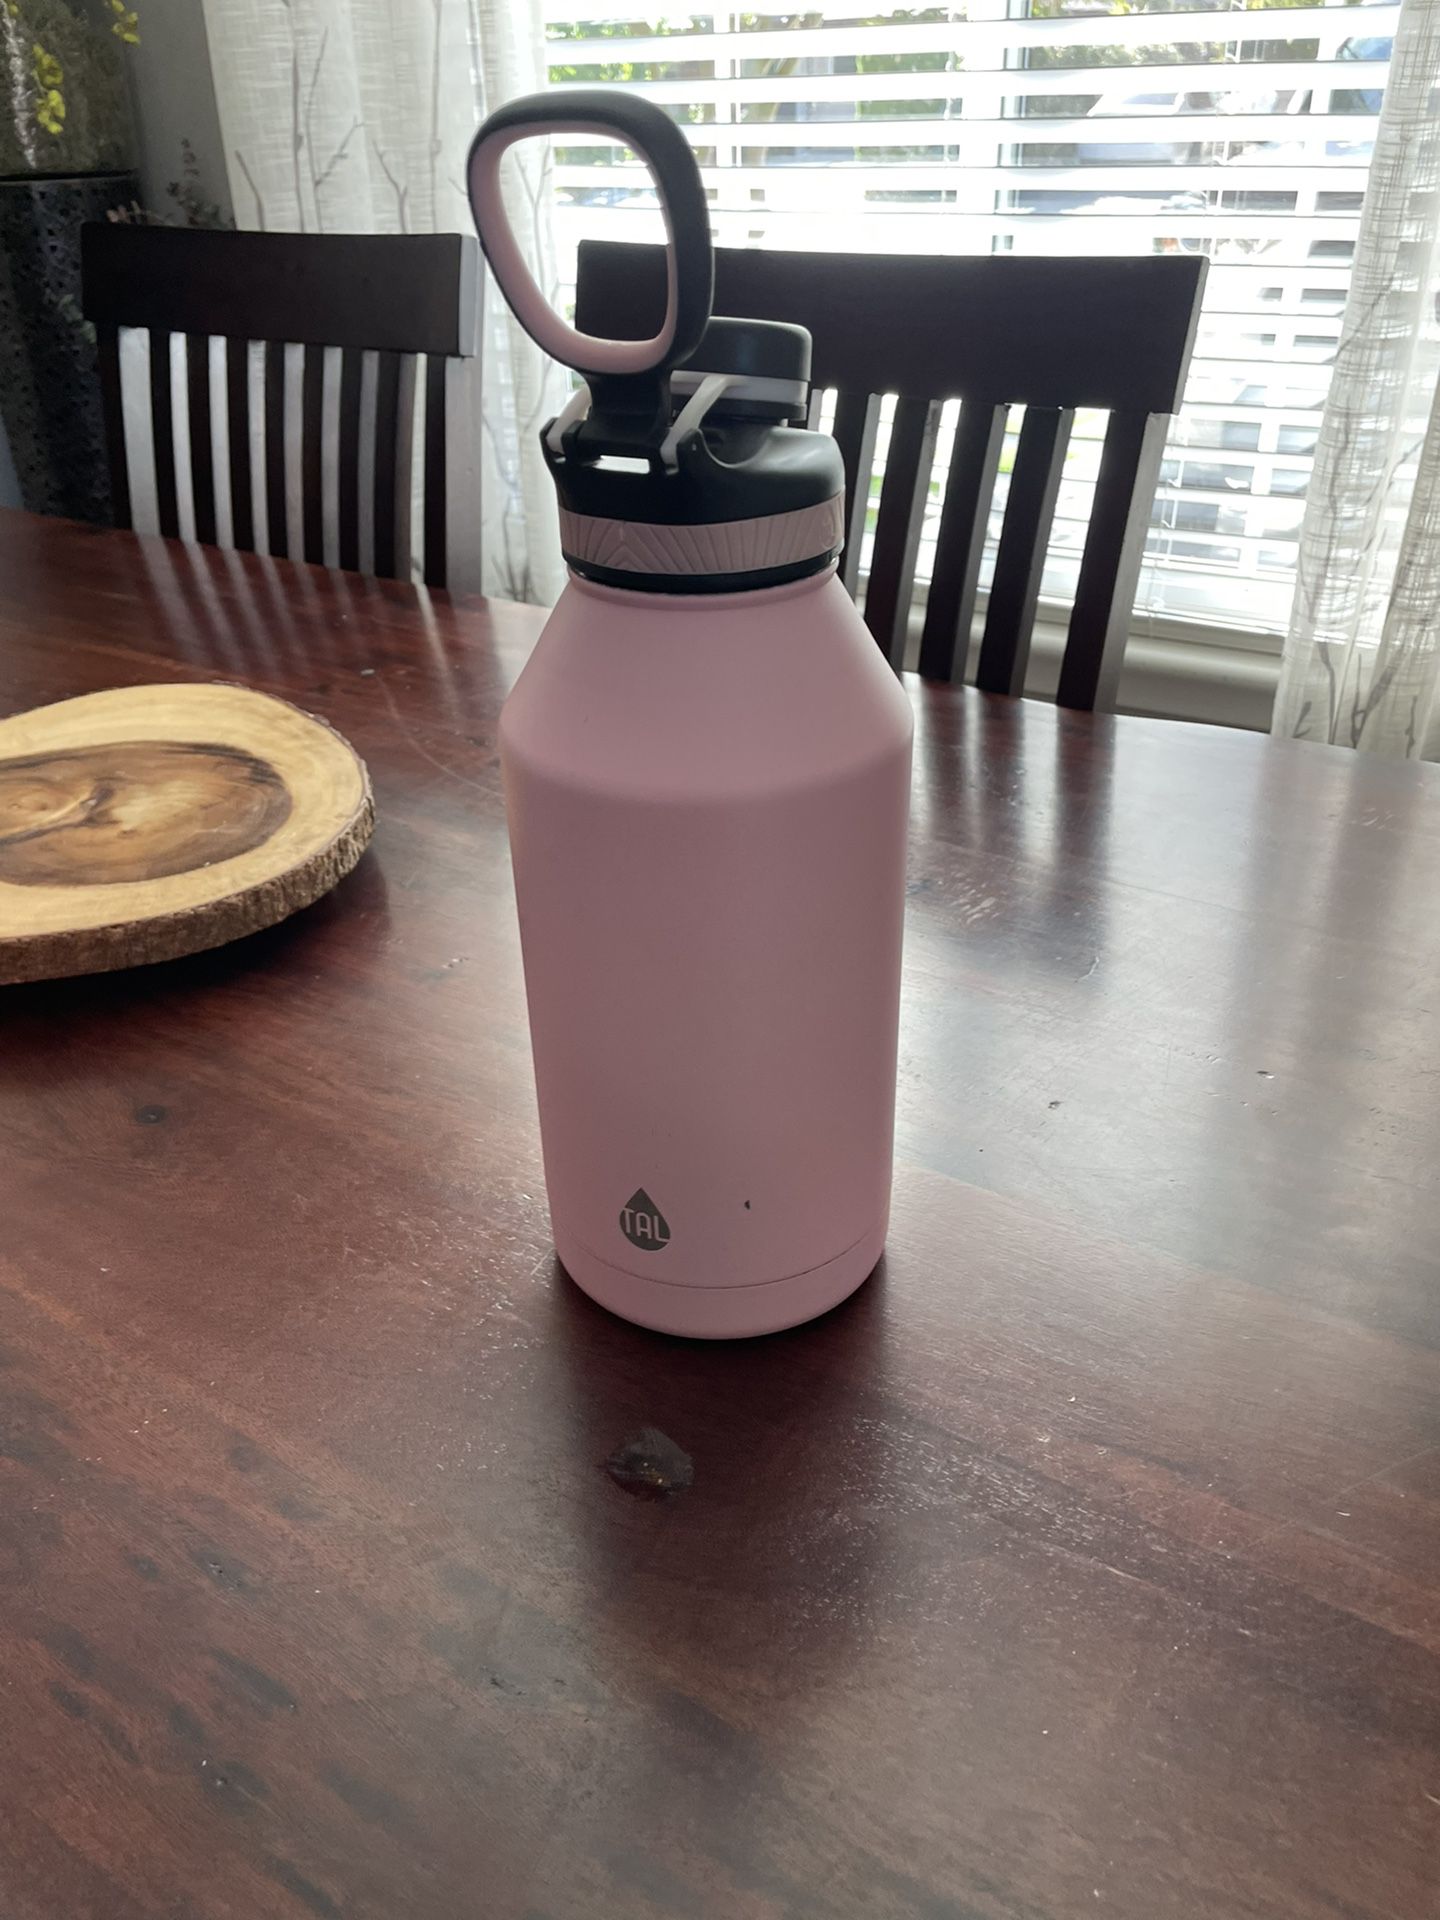 TAL Water Bottle Double Wall Insulated Stainless Steel Ranger Pro